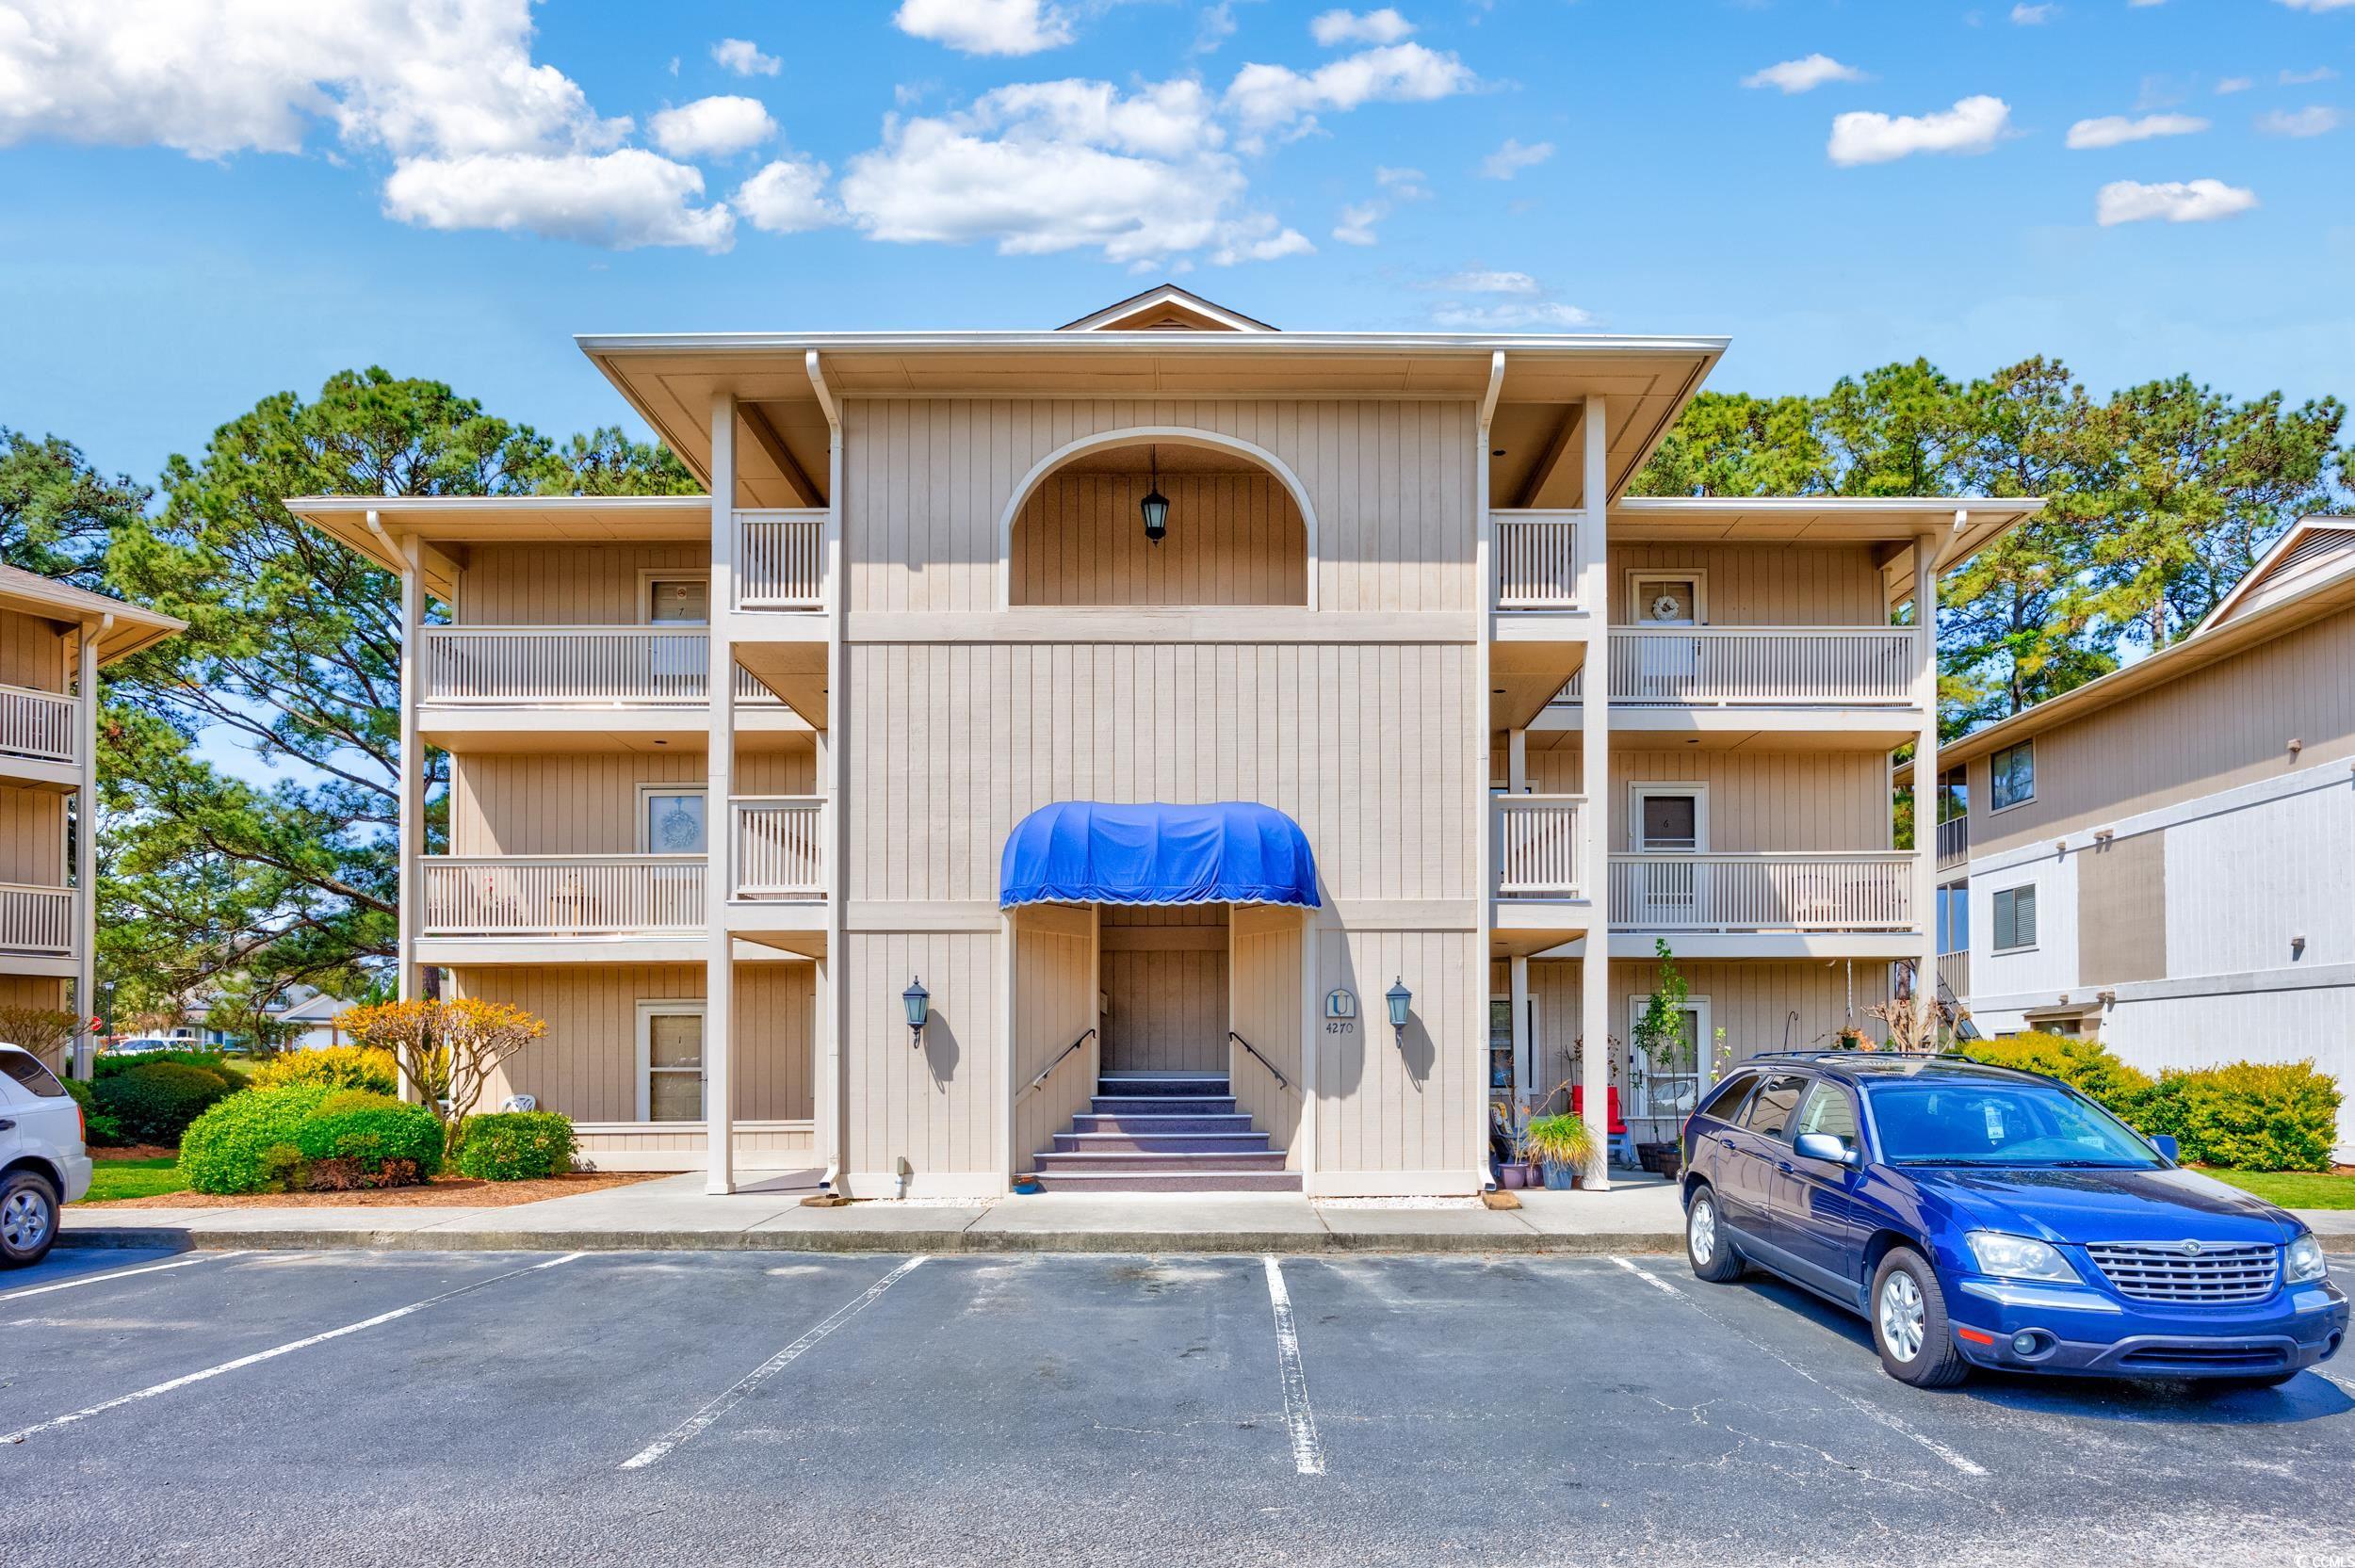 great first floor unit at cypress bay. this unit has new flooring, recently painted, hvac replaced in 2022 and the roof was replaced in 2018. very well maintained. cypress bay is close to cvs, food lion, lowe's food, waterfront restaurants, calabash and only minutes to the beach and highway 22.